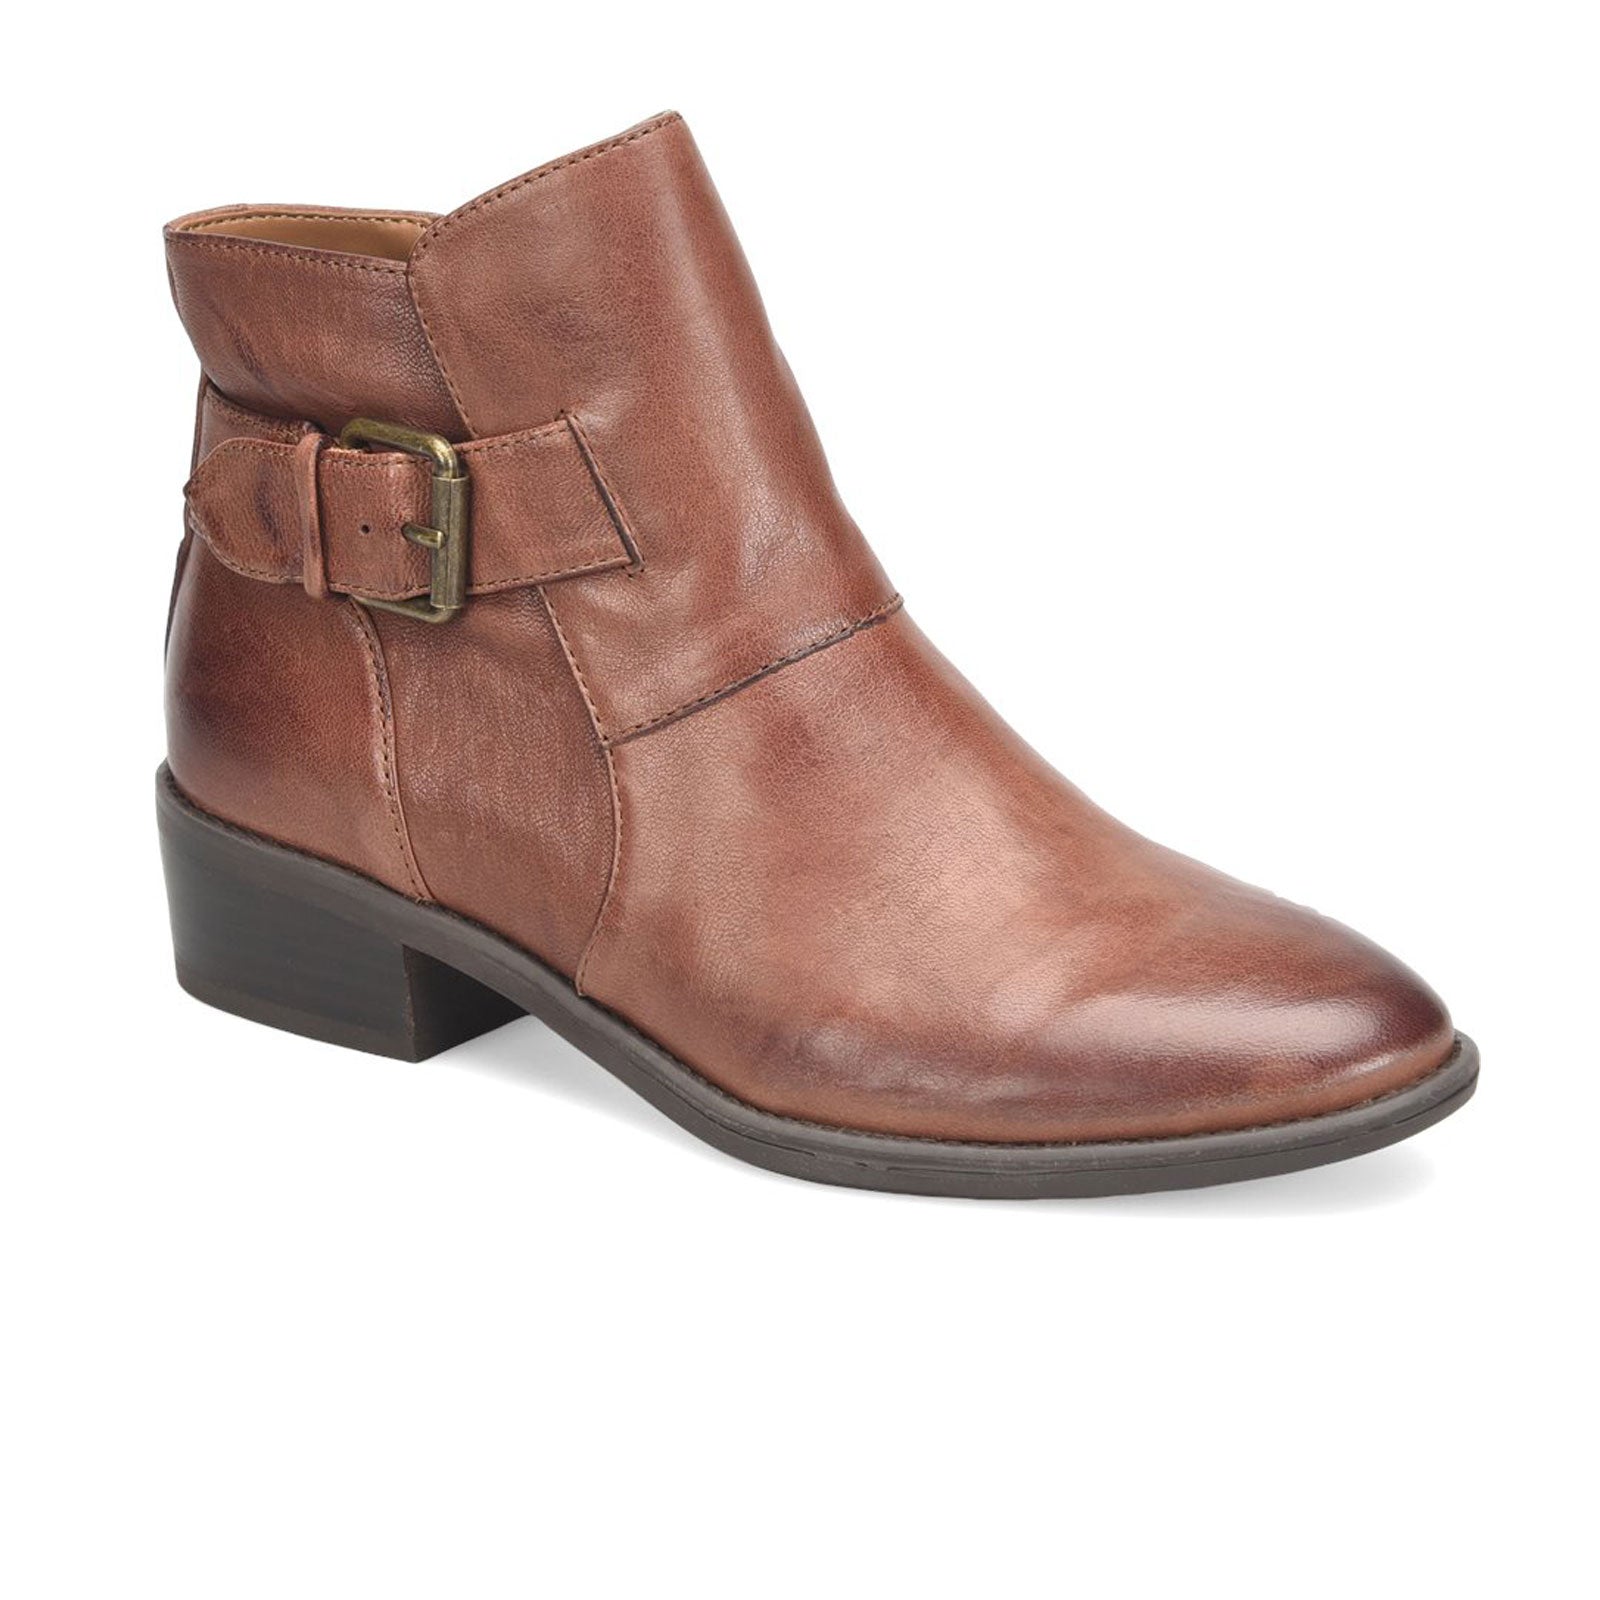 Comfortiva Cardee Ankle Boot (Women) - Caffe